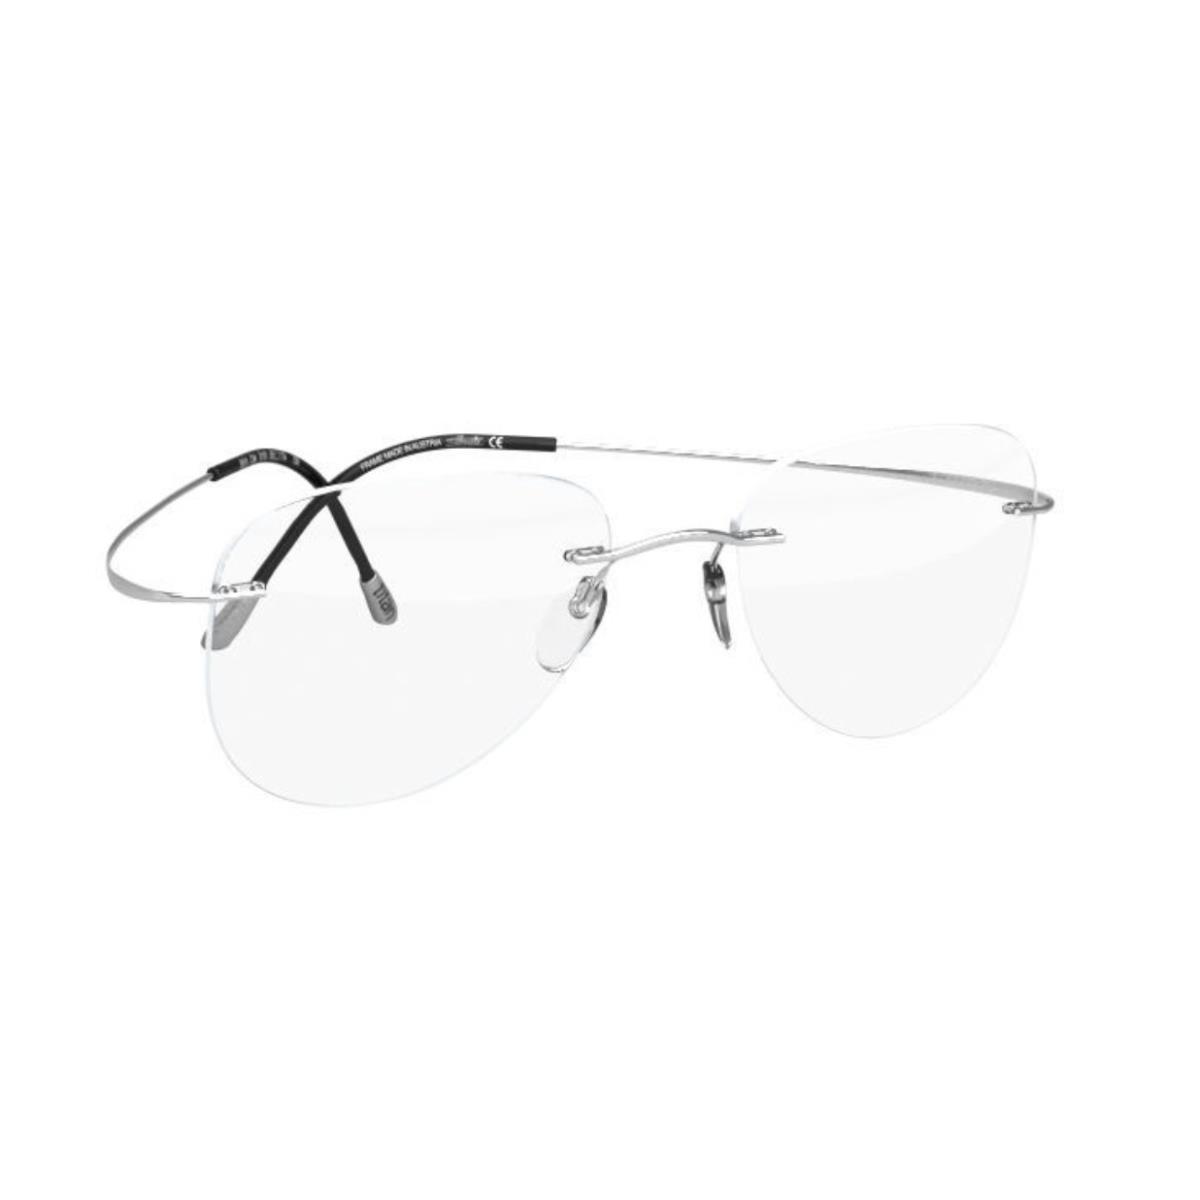 Silhouette 5515 Rimless Eyeglasses Titan Minimal Art The Must Collection Frames STERLING SILVER - 7010, SIZE: 55-17 150, SHAPE-CM